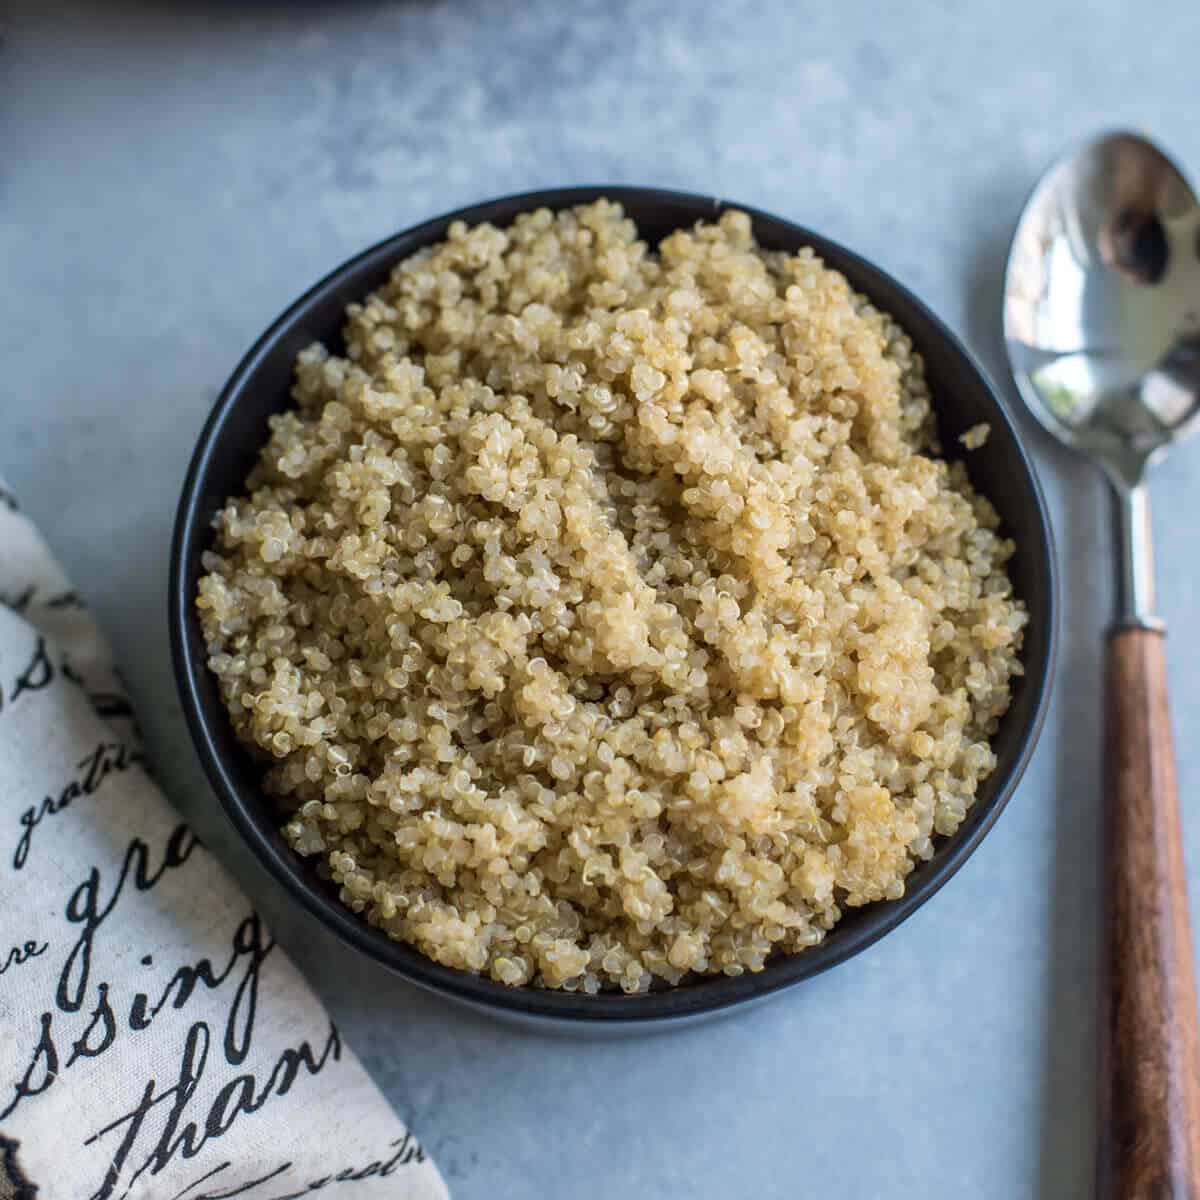 A black bowl with fluffy quinoa and a silver spoon with a wooden handle to the right.